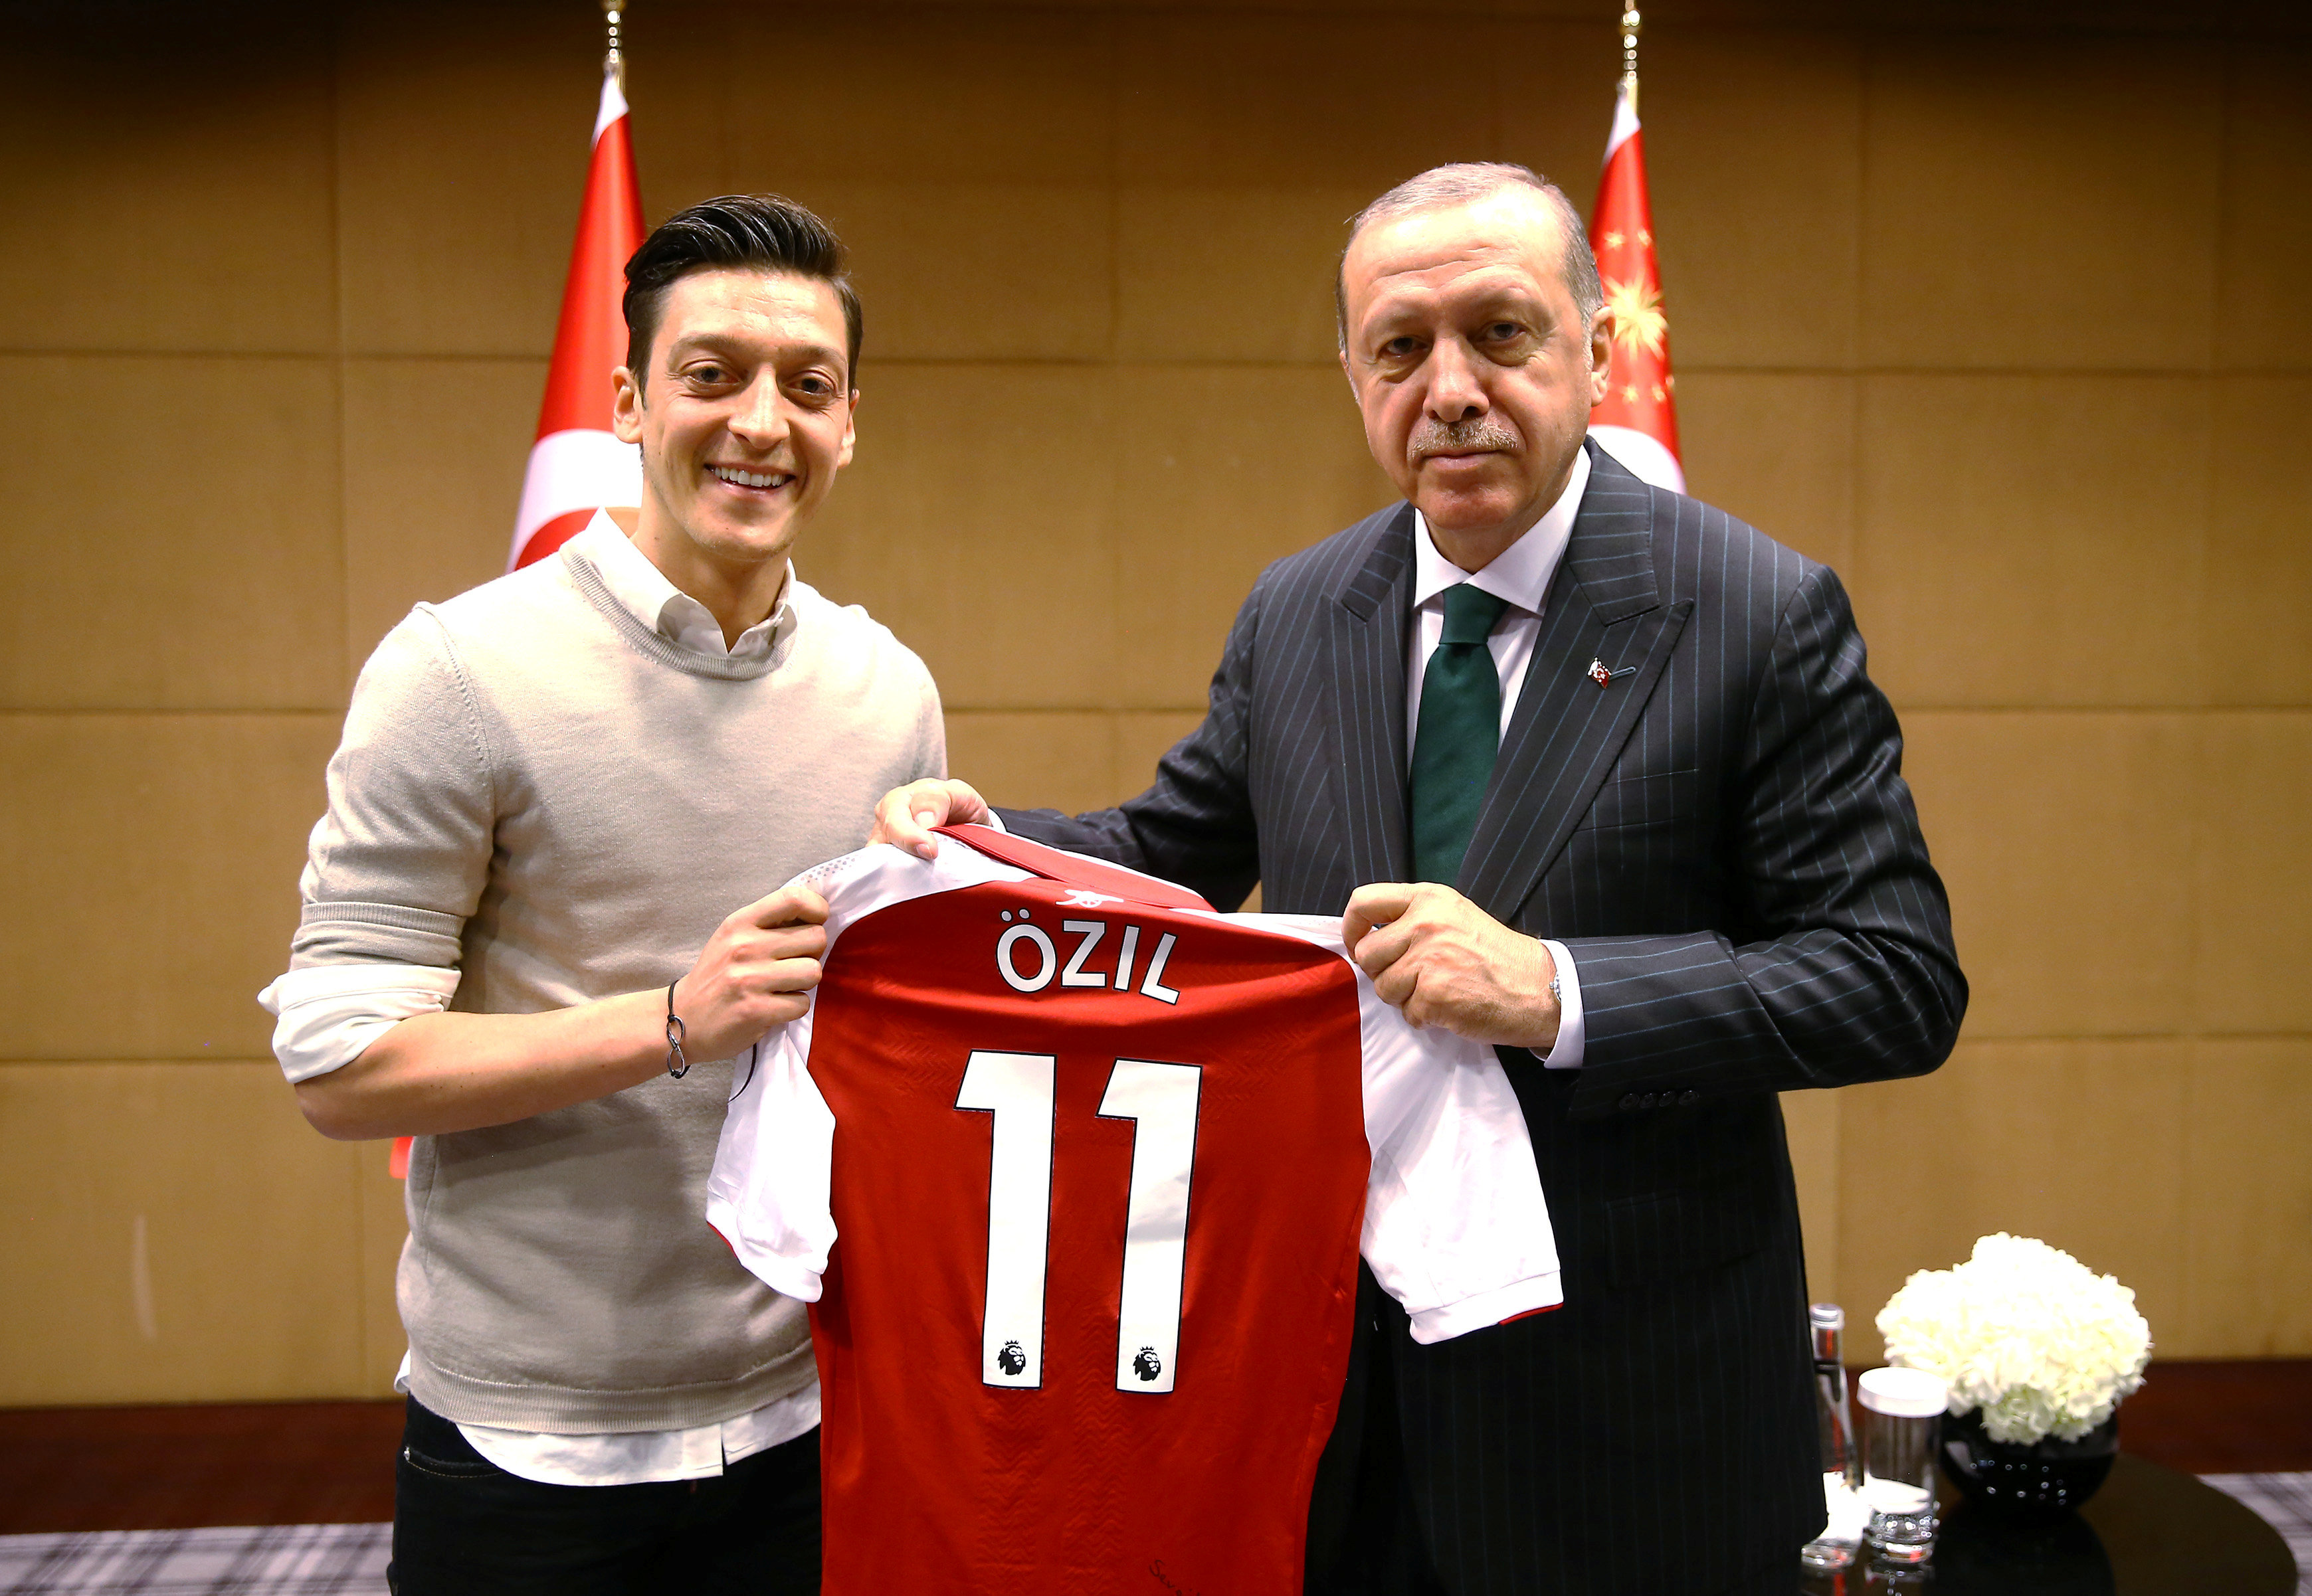 Football: Ozil quits German national side citing racism